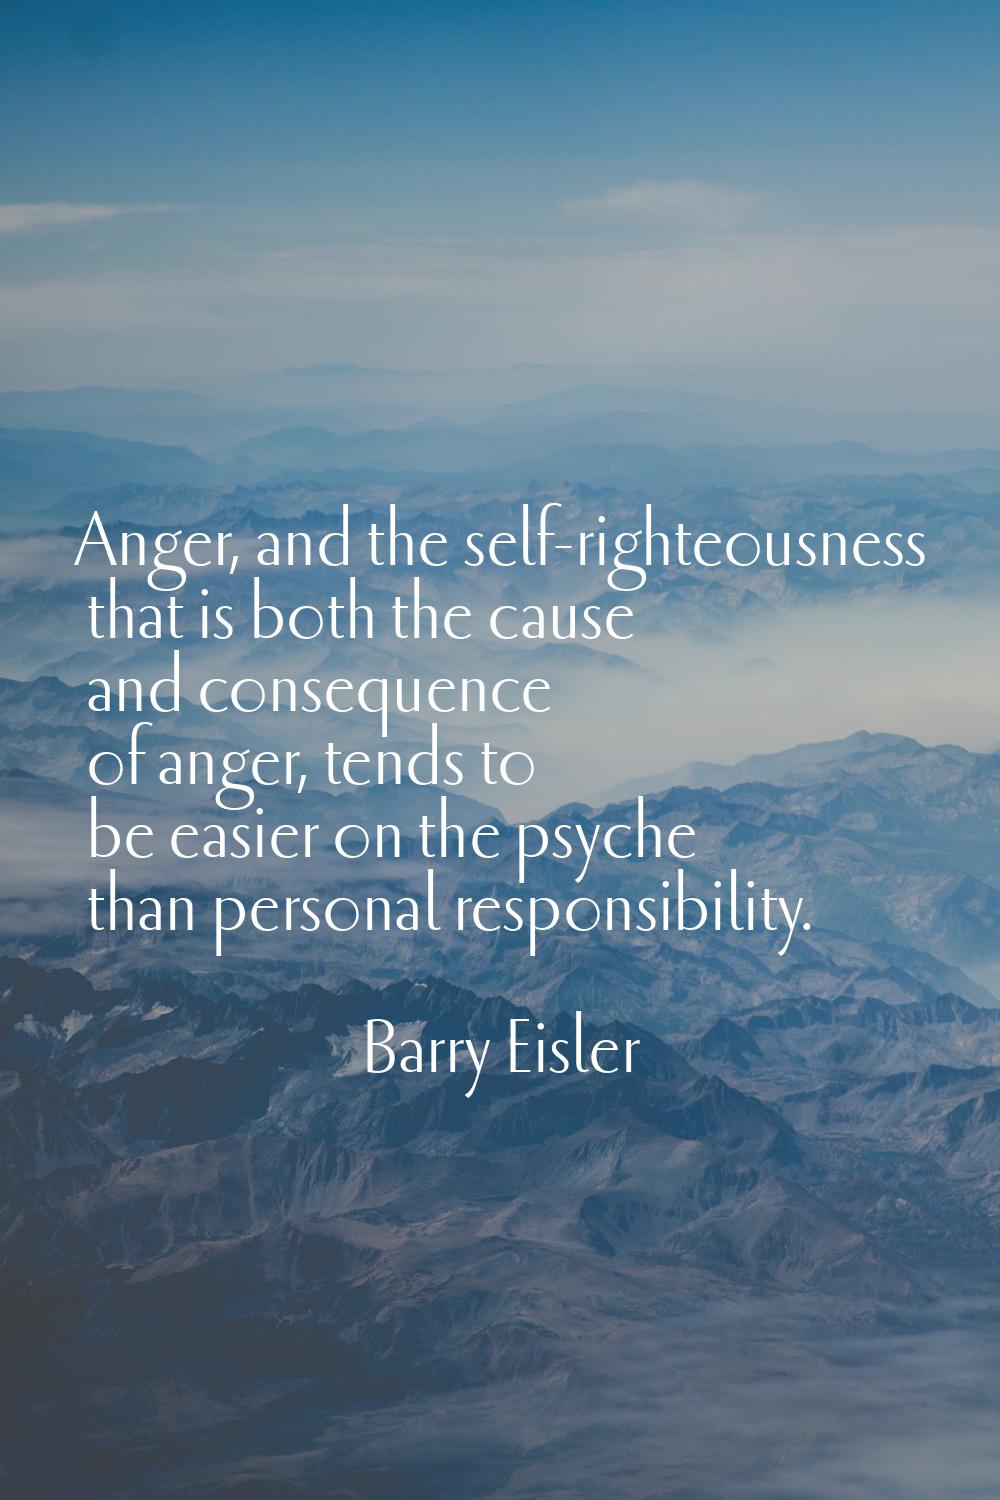 Anger, and the self-righteousness that is both the cause and consequence of anger, tends to be easi